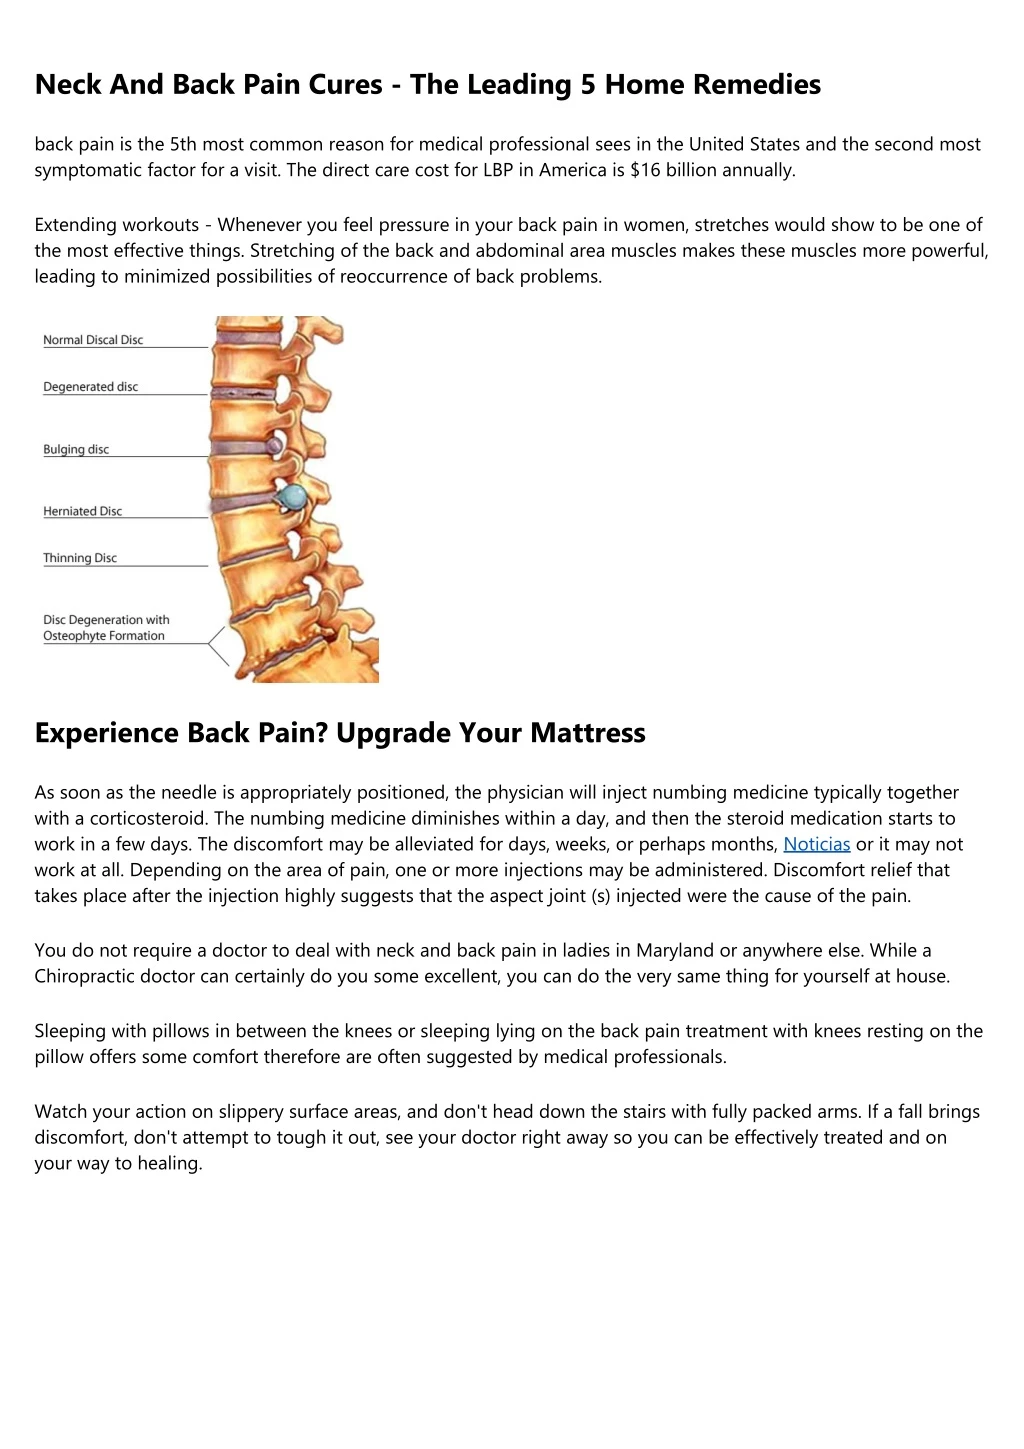 neck and back pain cures the leading 5 home